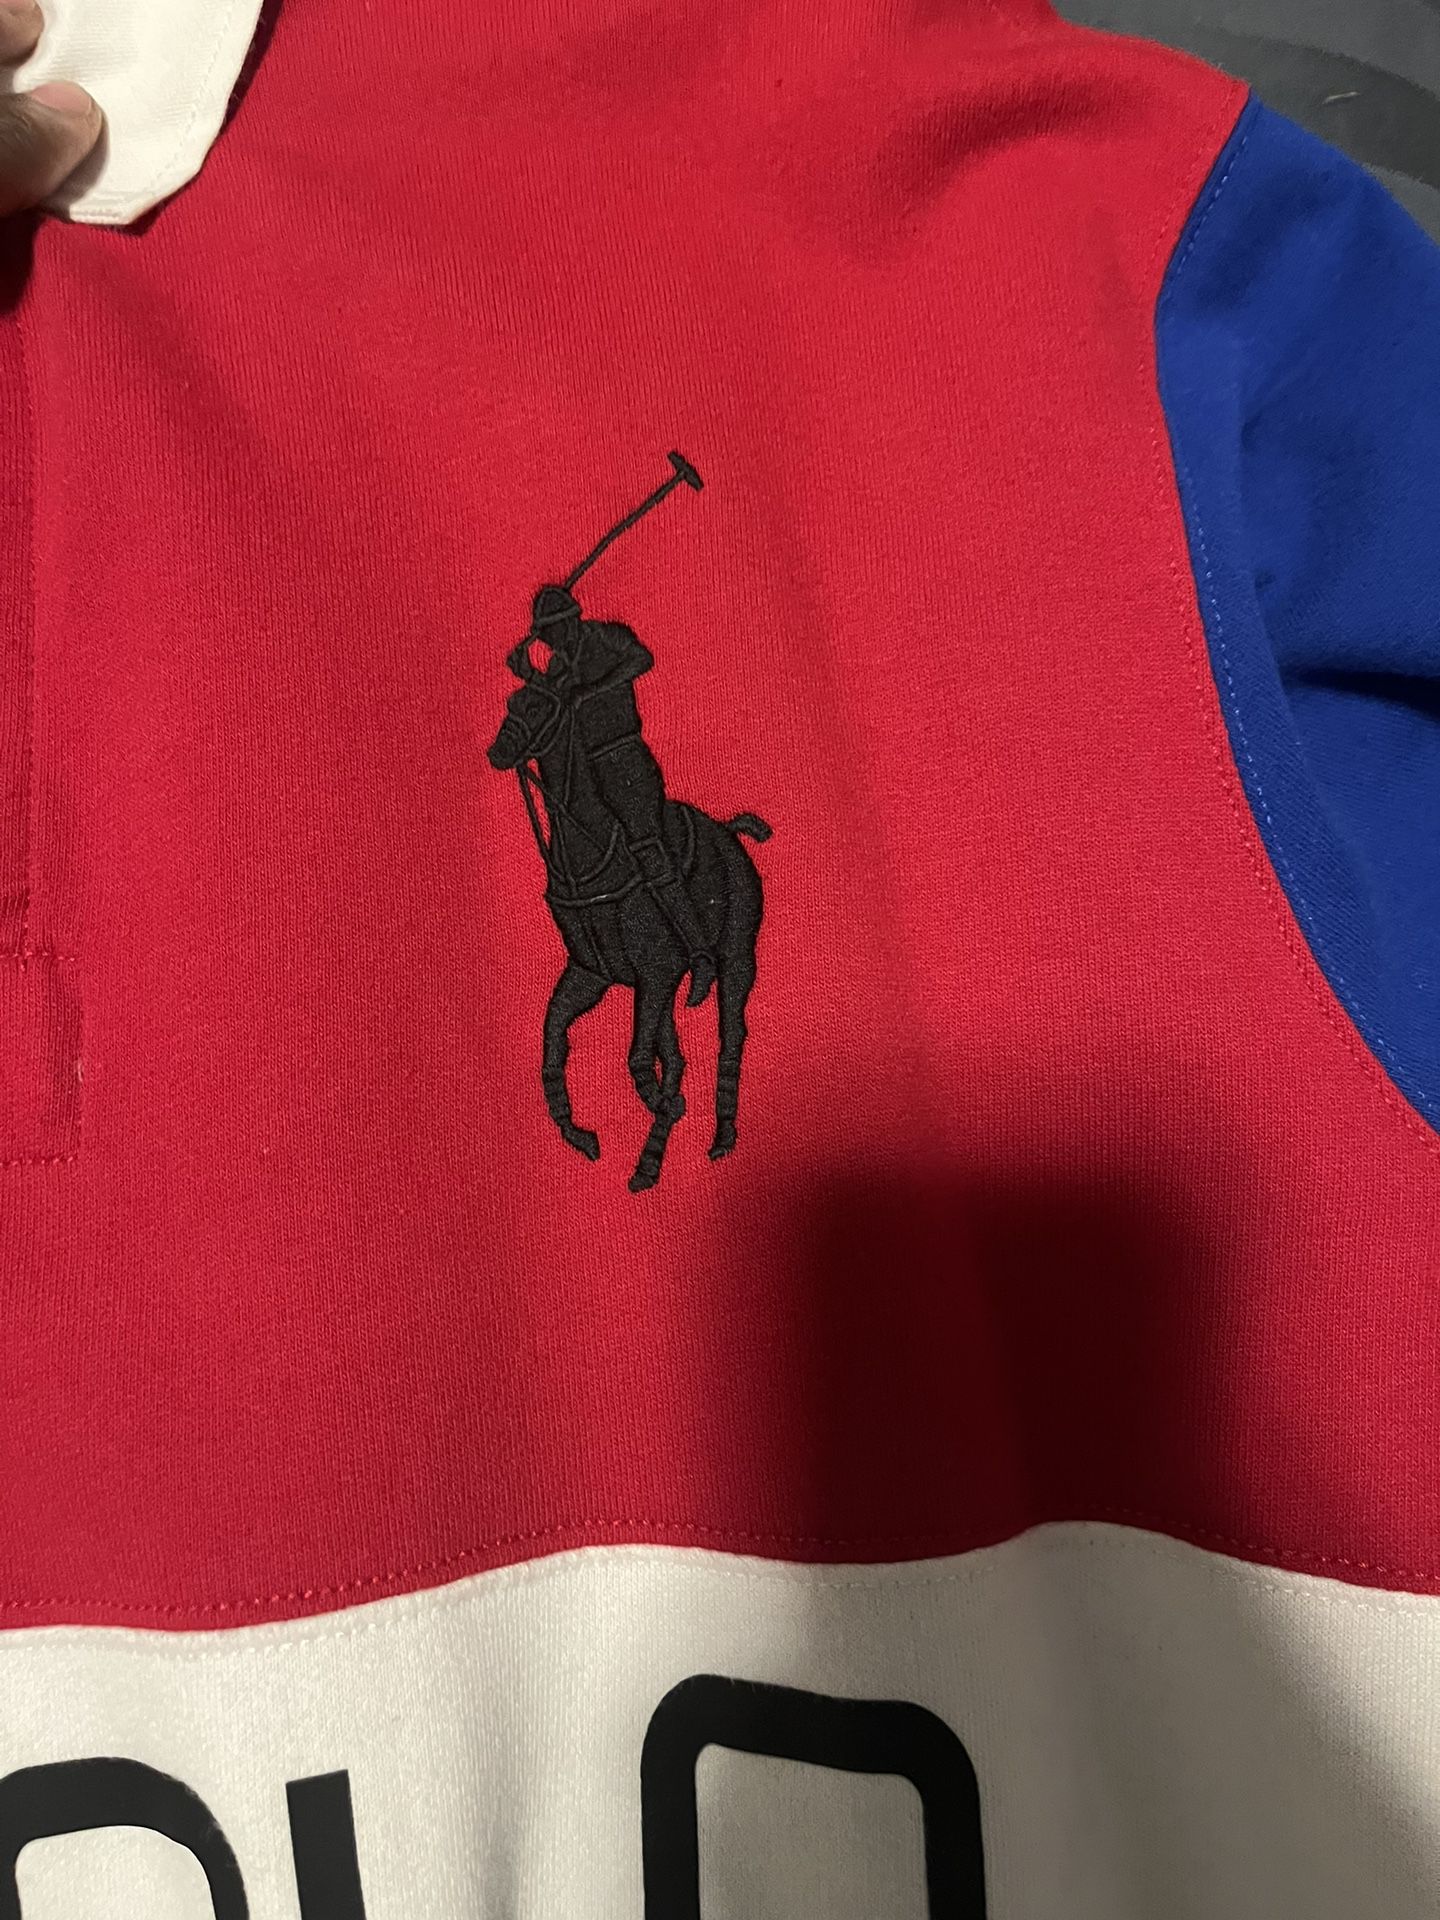 Polo Ralph Lauren Downhill Ski Series Rugby Shirt Size  Color Block